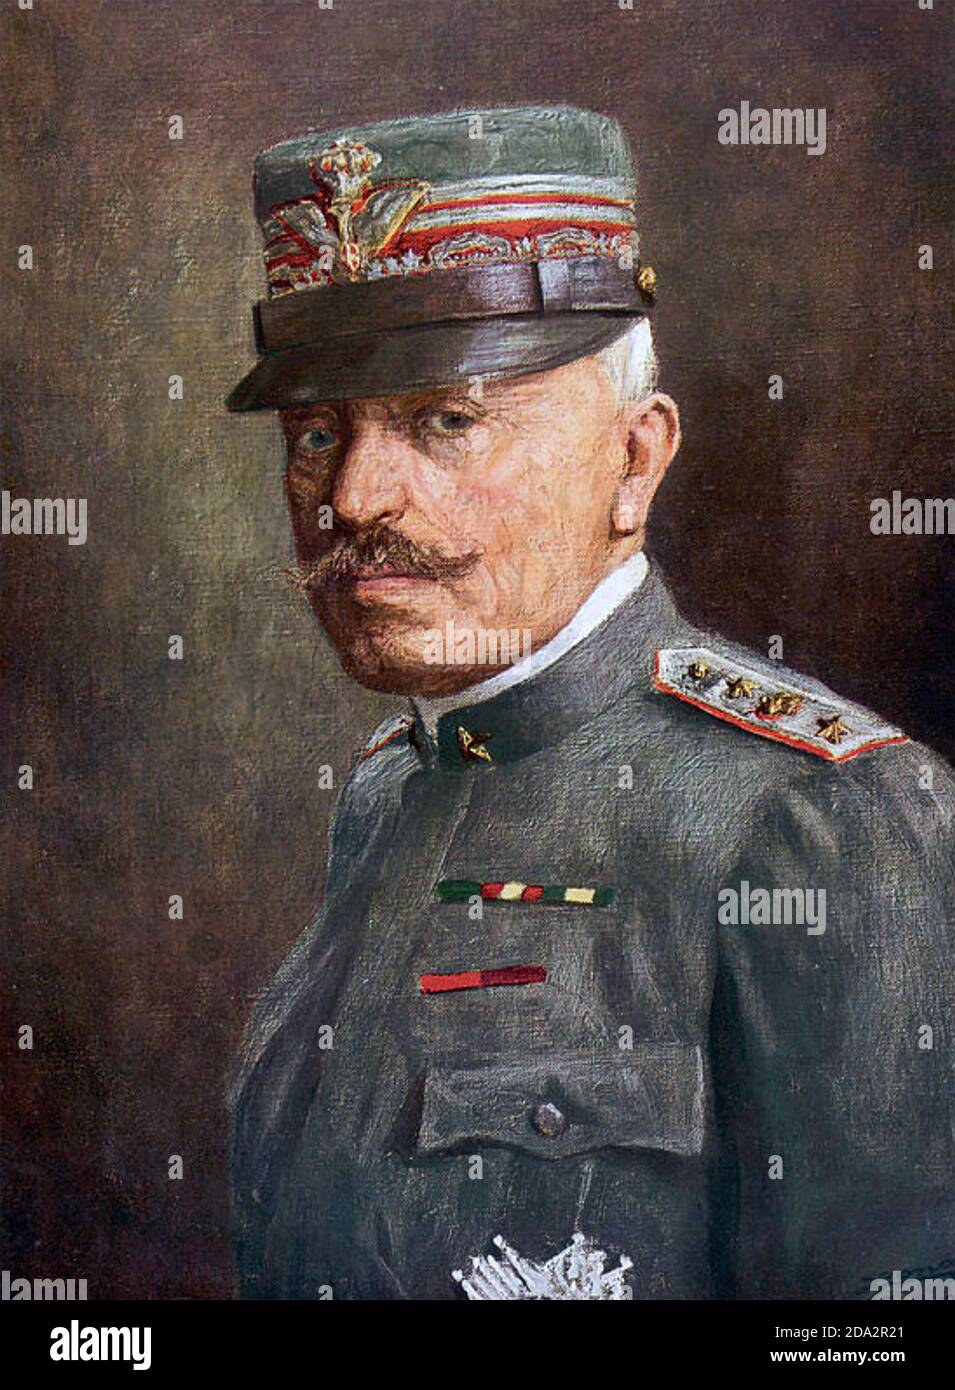 LUIGI CADORNA (1850-1928) as a General in the Italian Army in WWI. Stock Photo